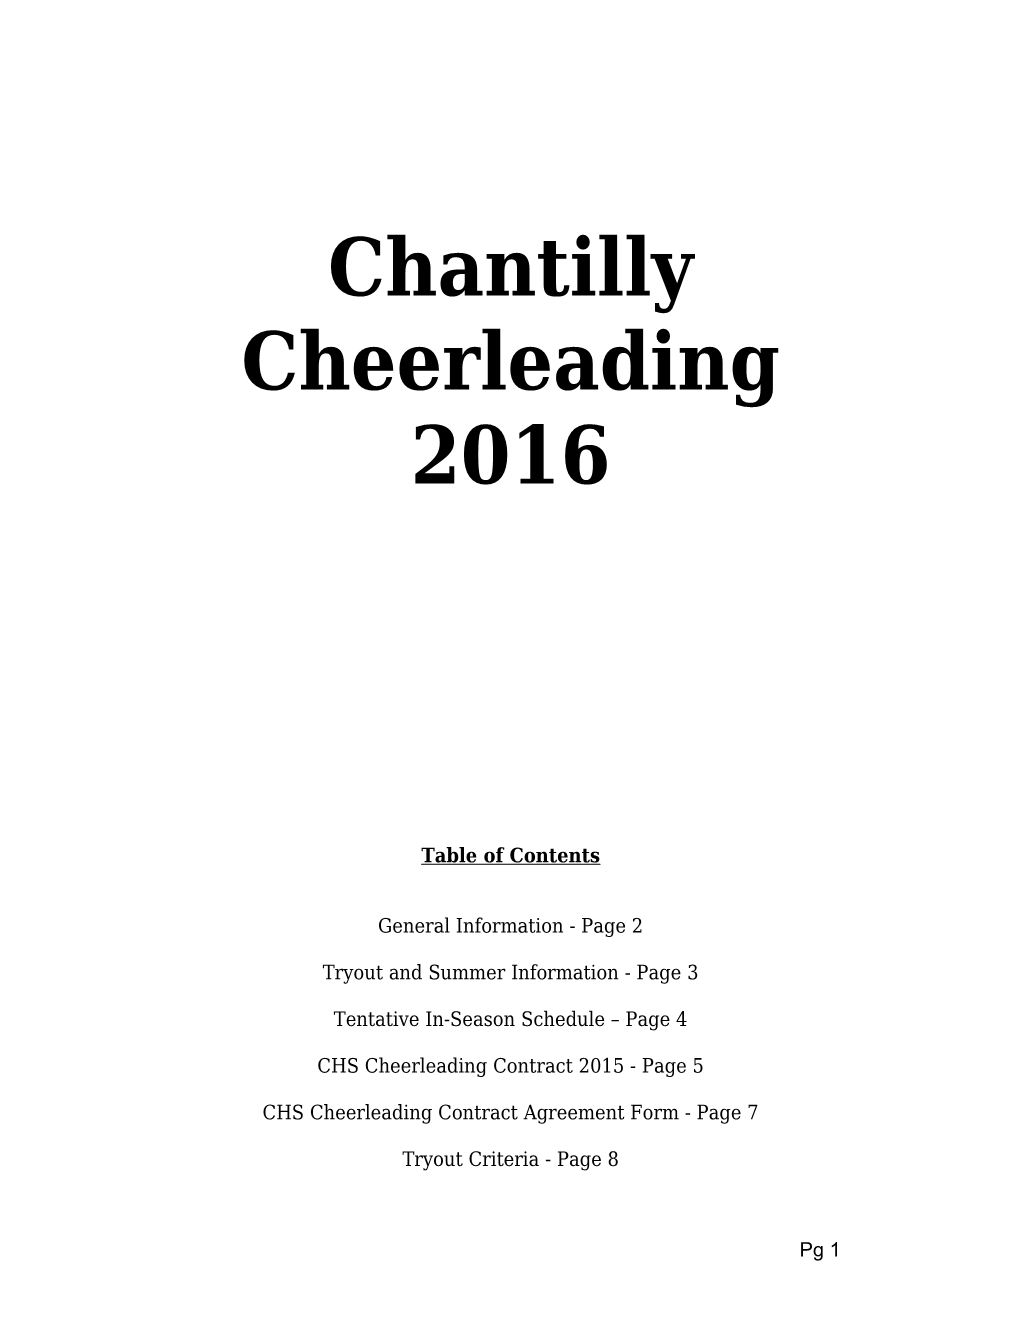 All Athletes in the Cheerleading Program Are Expected to Adhere to the Following Code Of